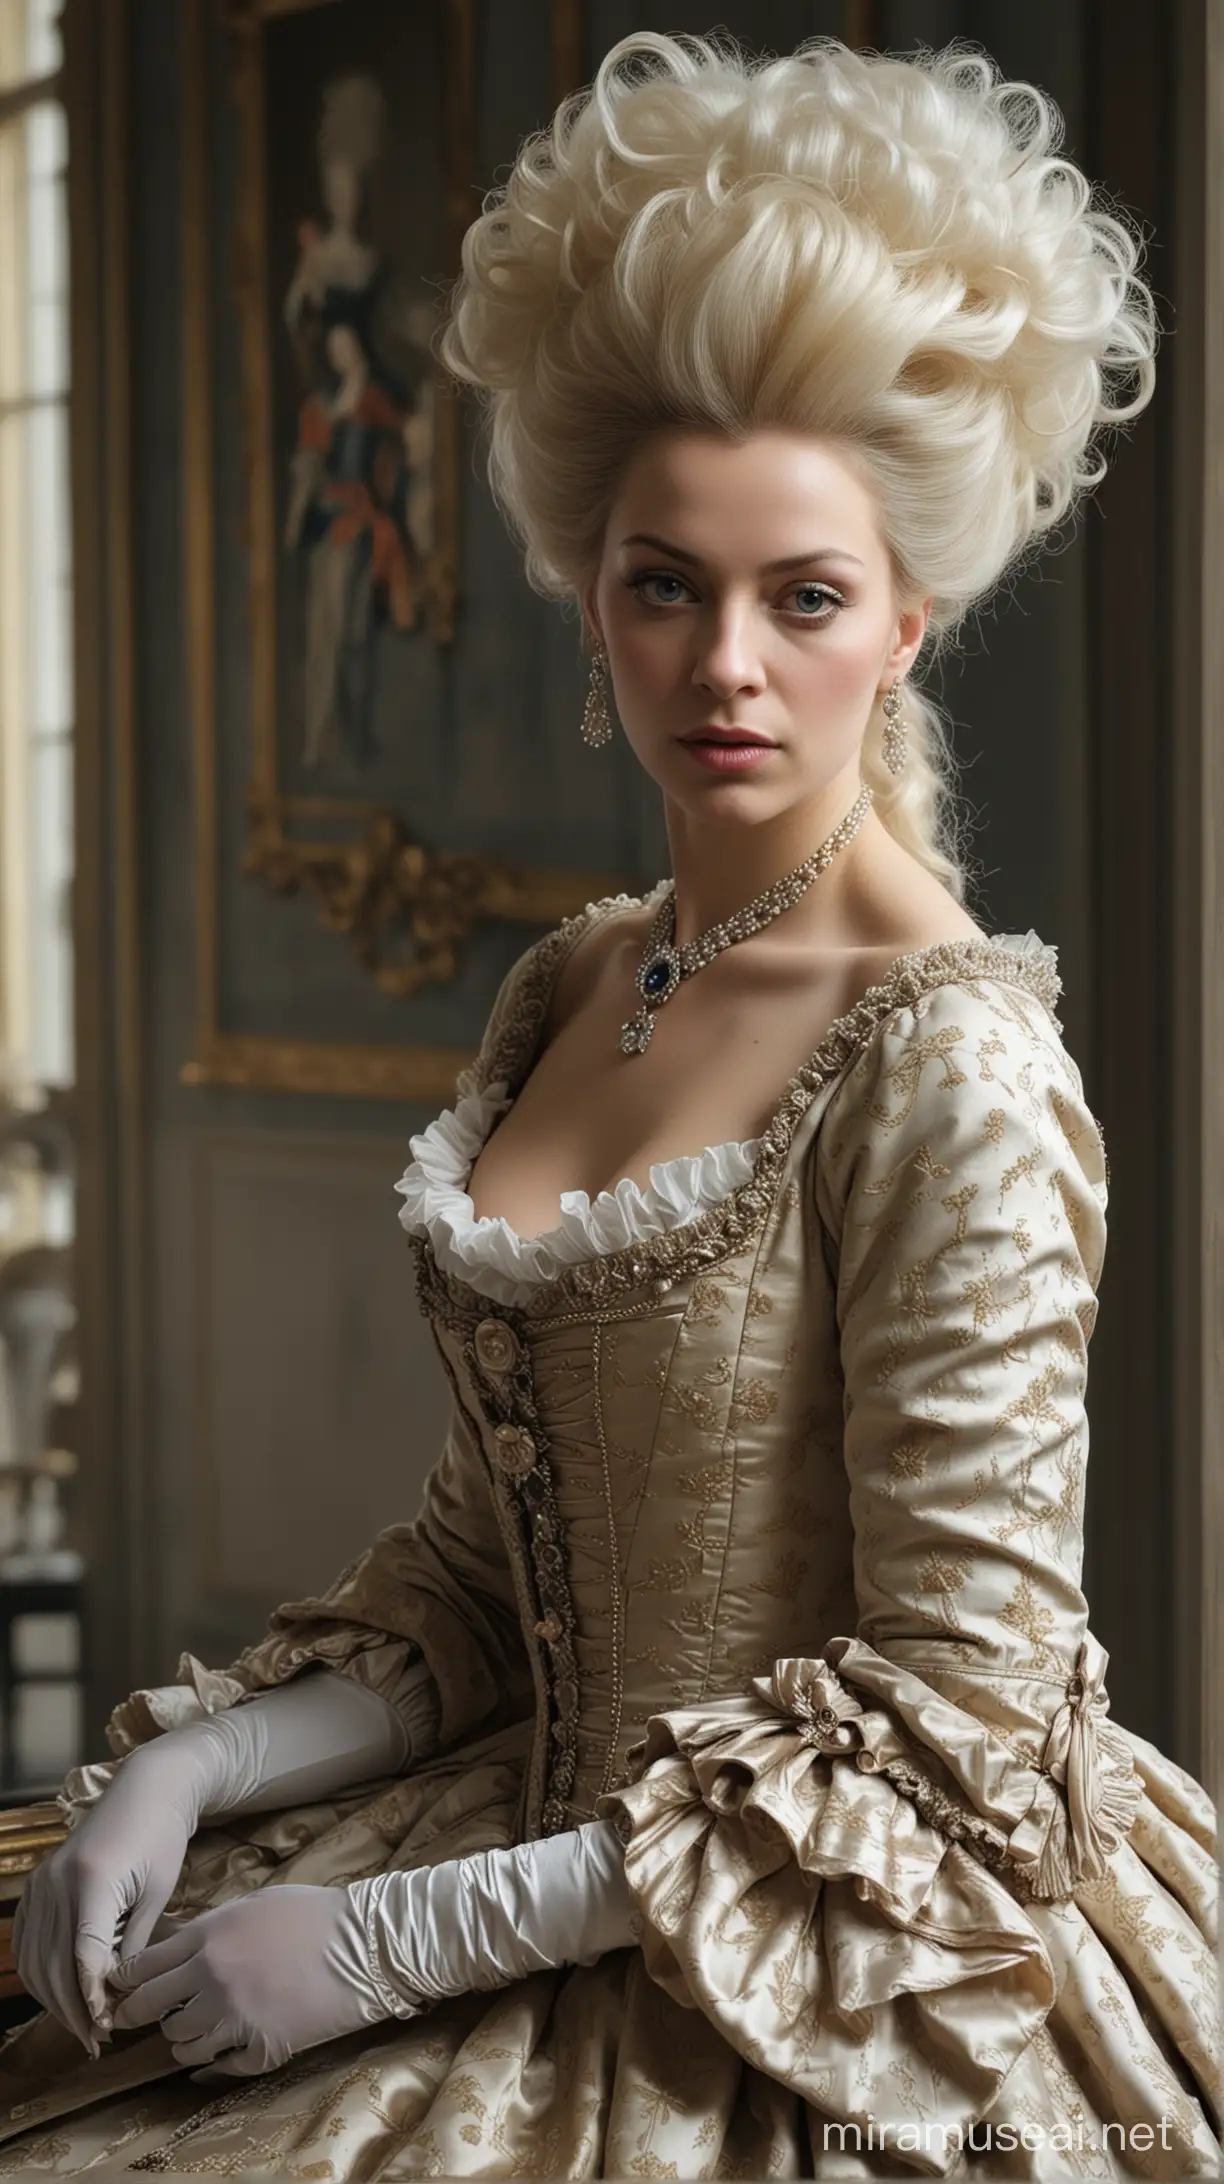 Marie Antoinette's elegant attire and demeanor contrasting with the grim surroundings. hyper realistic